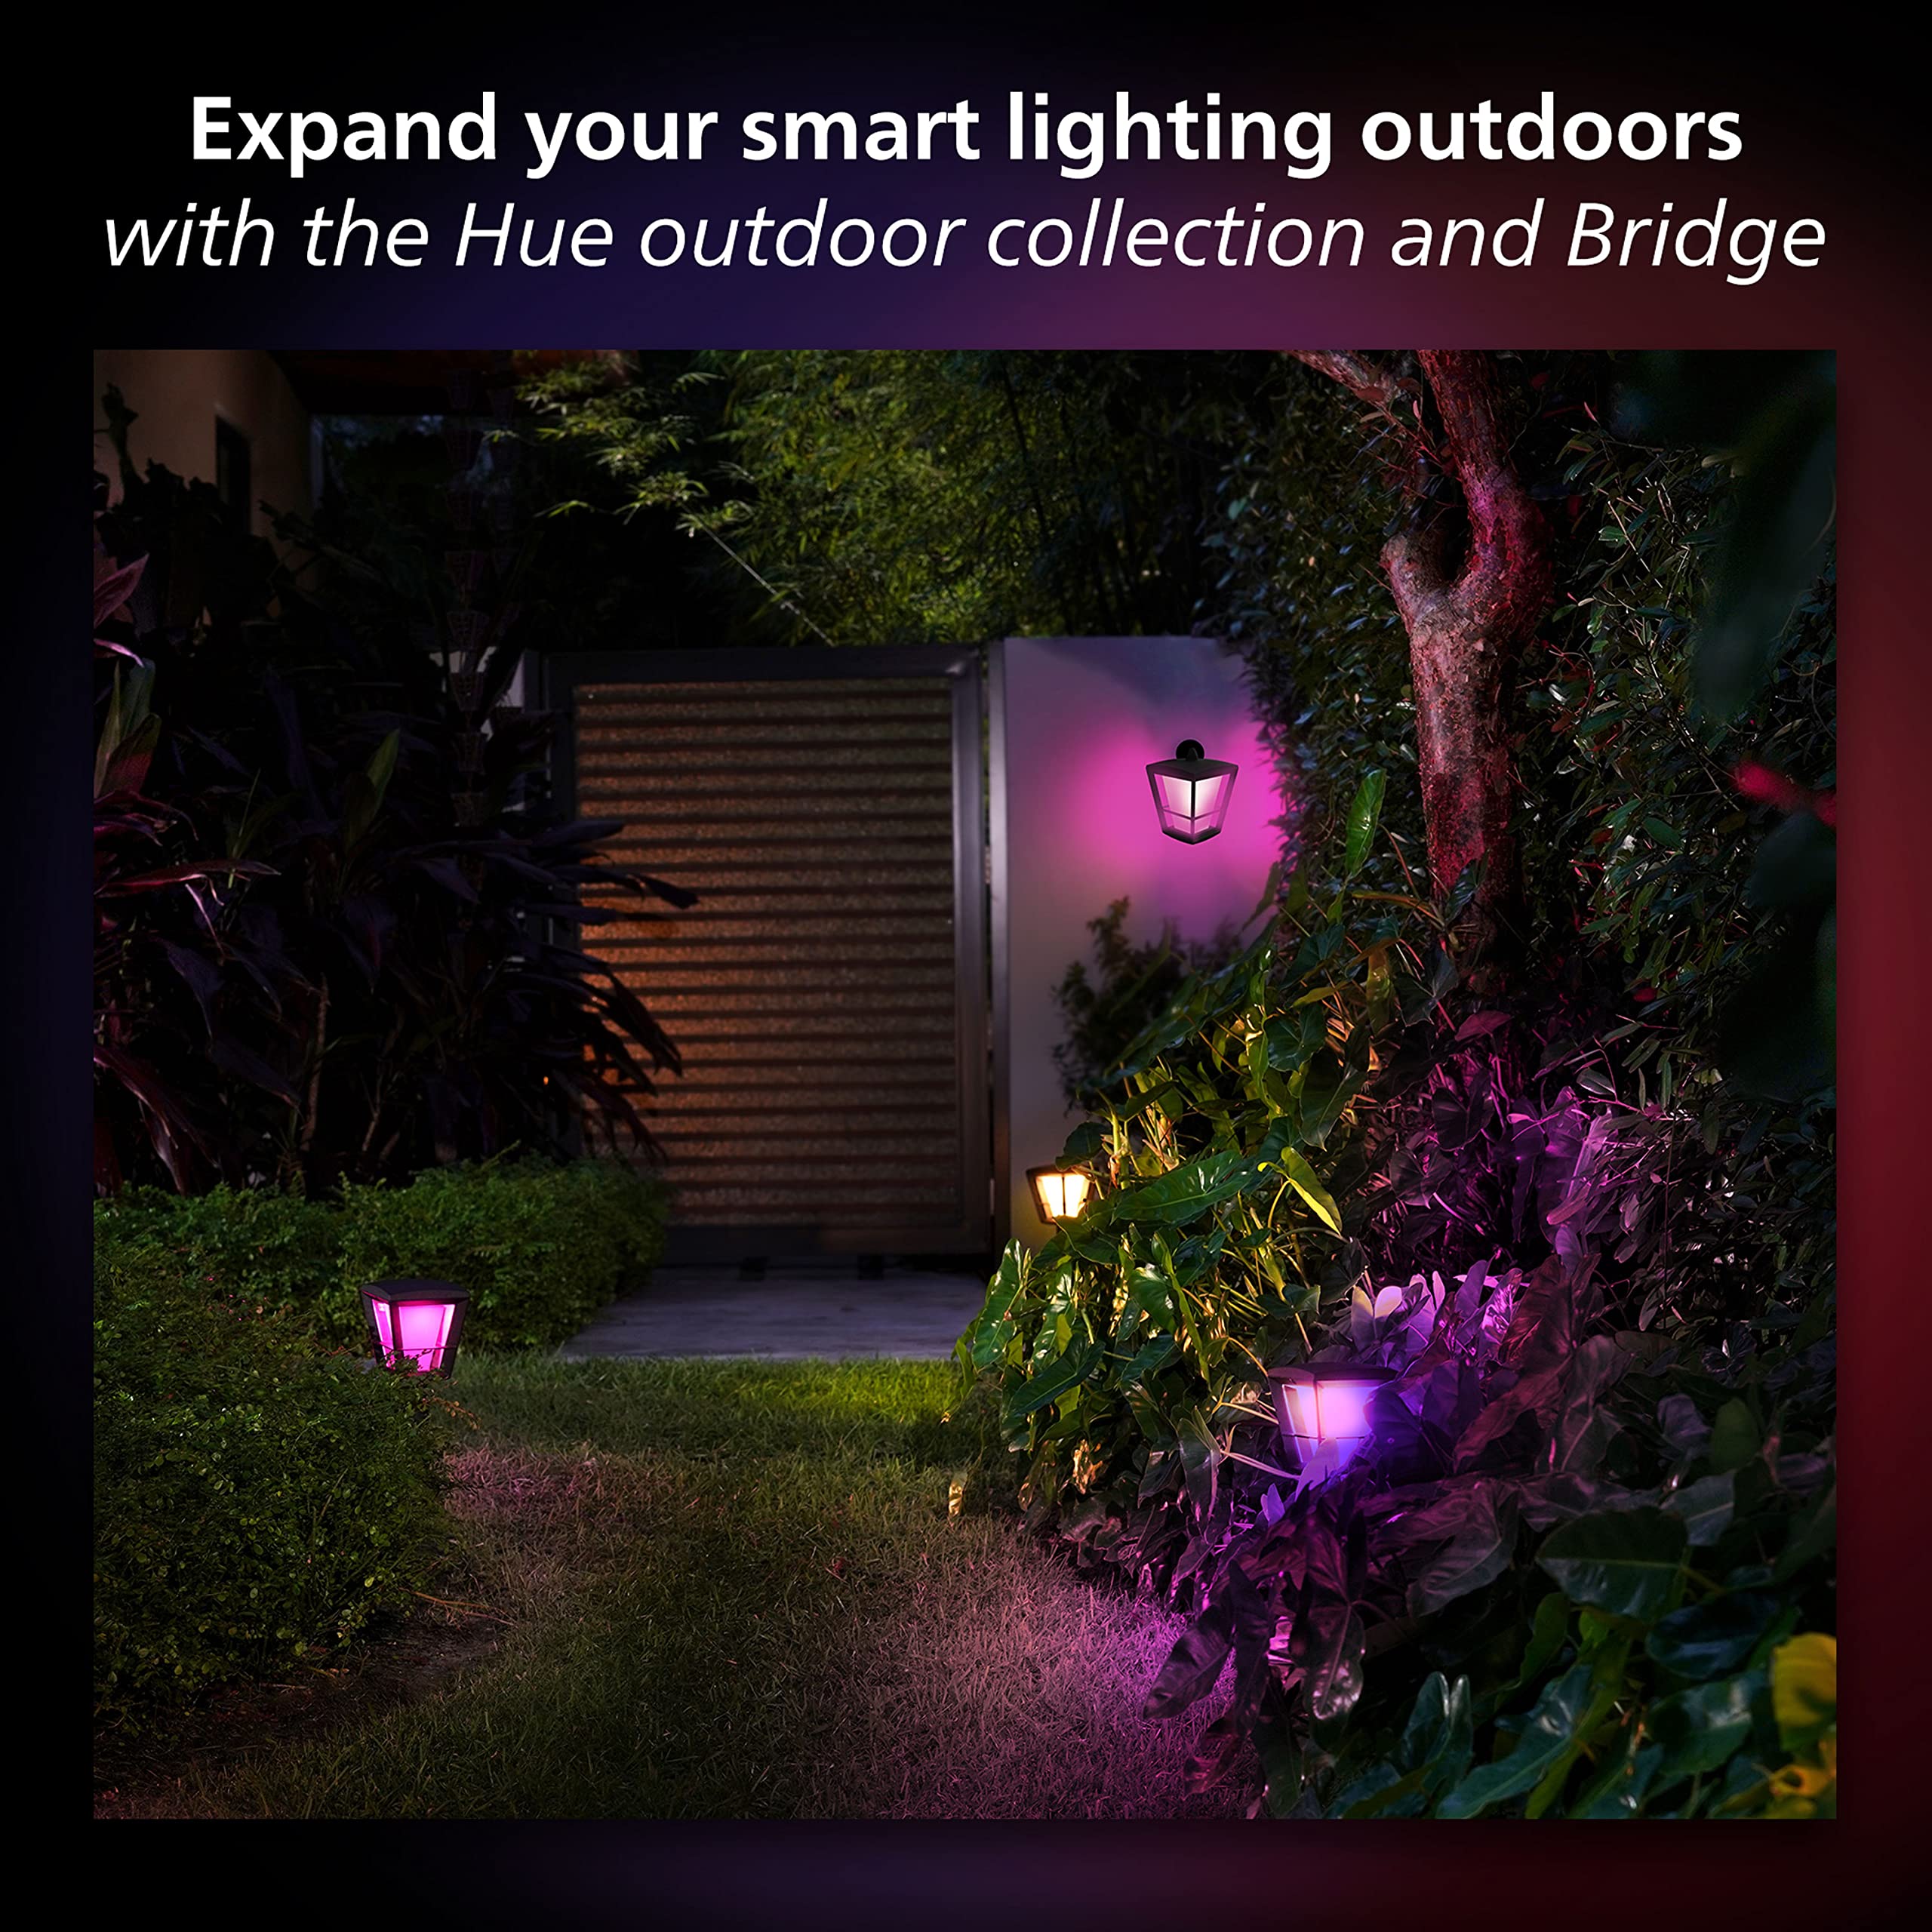 Philips Hue Outdoor Motion Sensor - 1 Pack - Turns Lights On When Motion is Detected - Weatherproof - Requires Hue Bridge - Compatible with Alexa, Apple HomeKit and Google Assistant